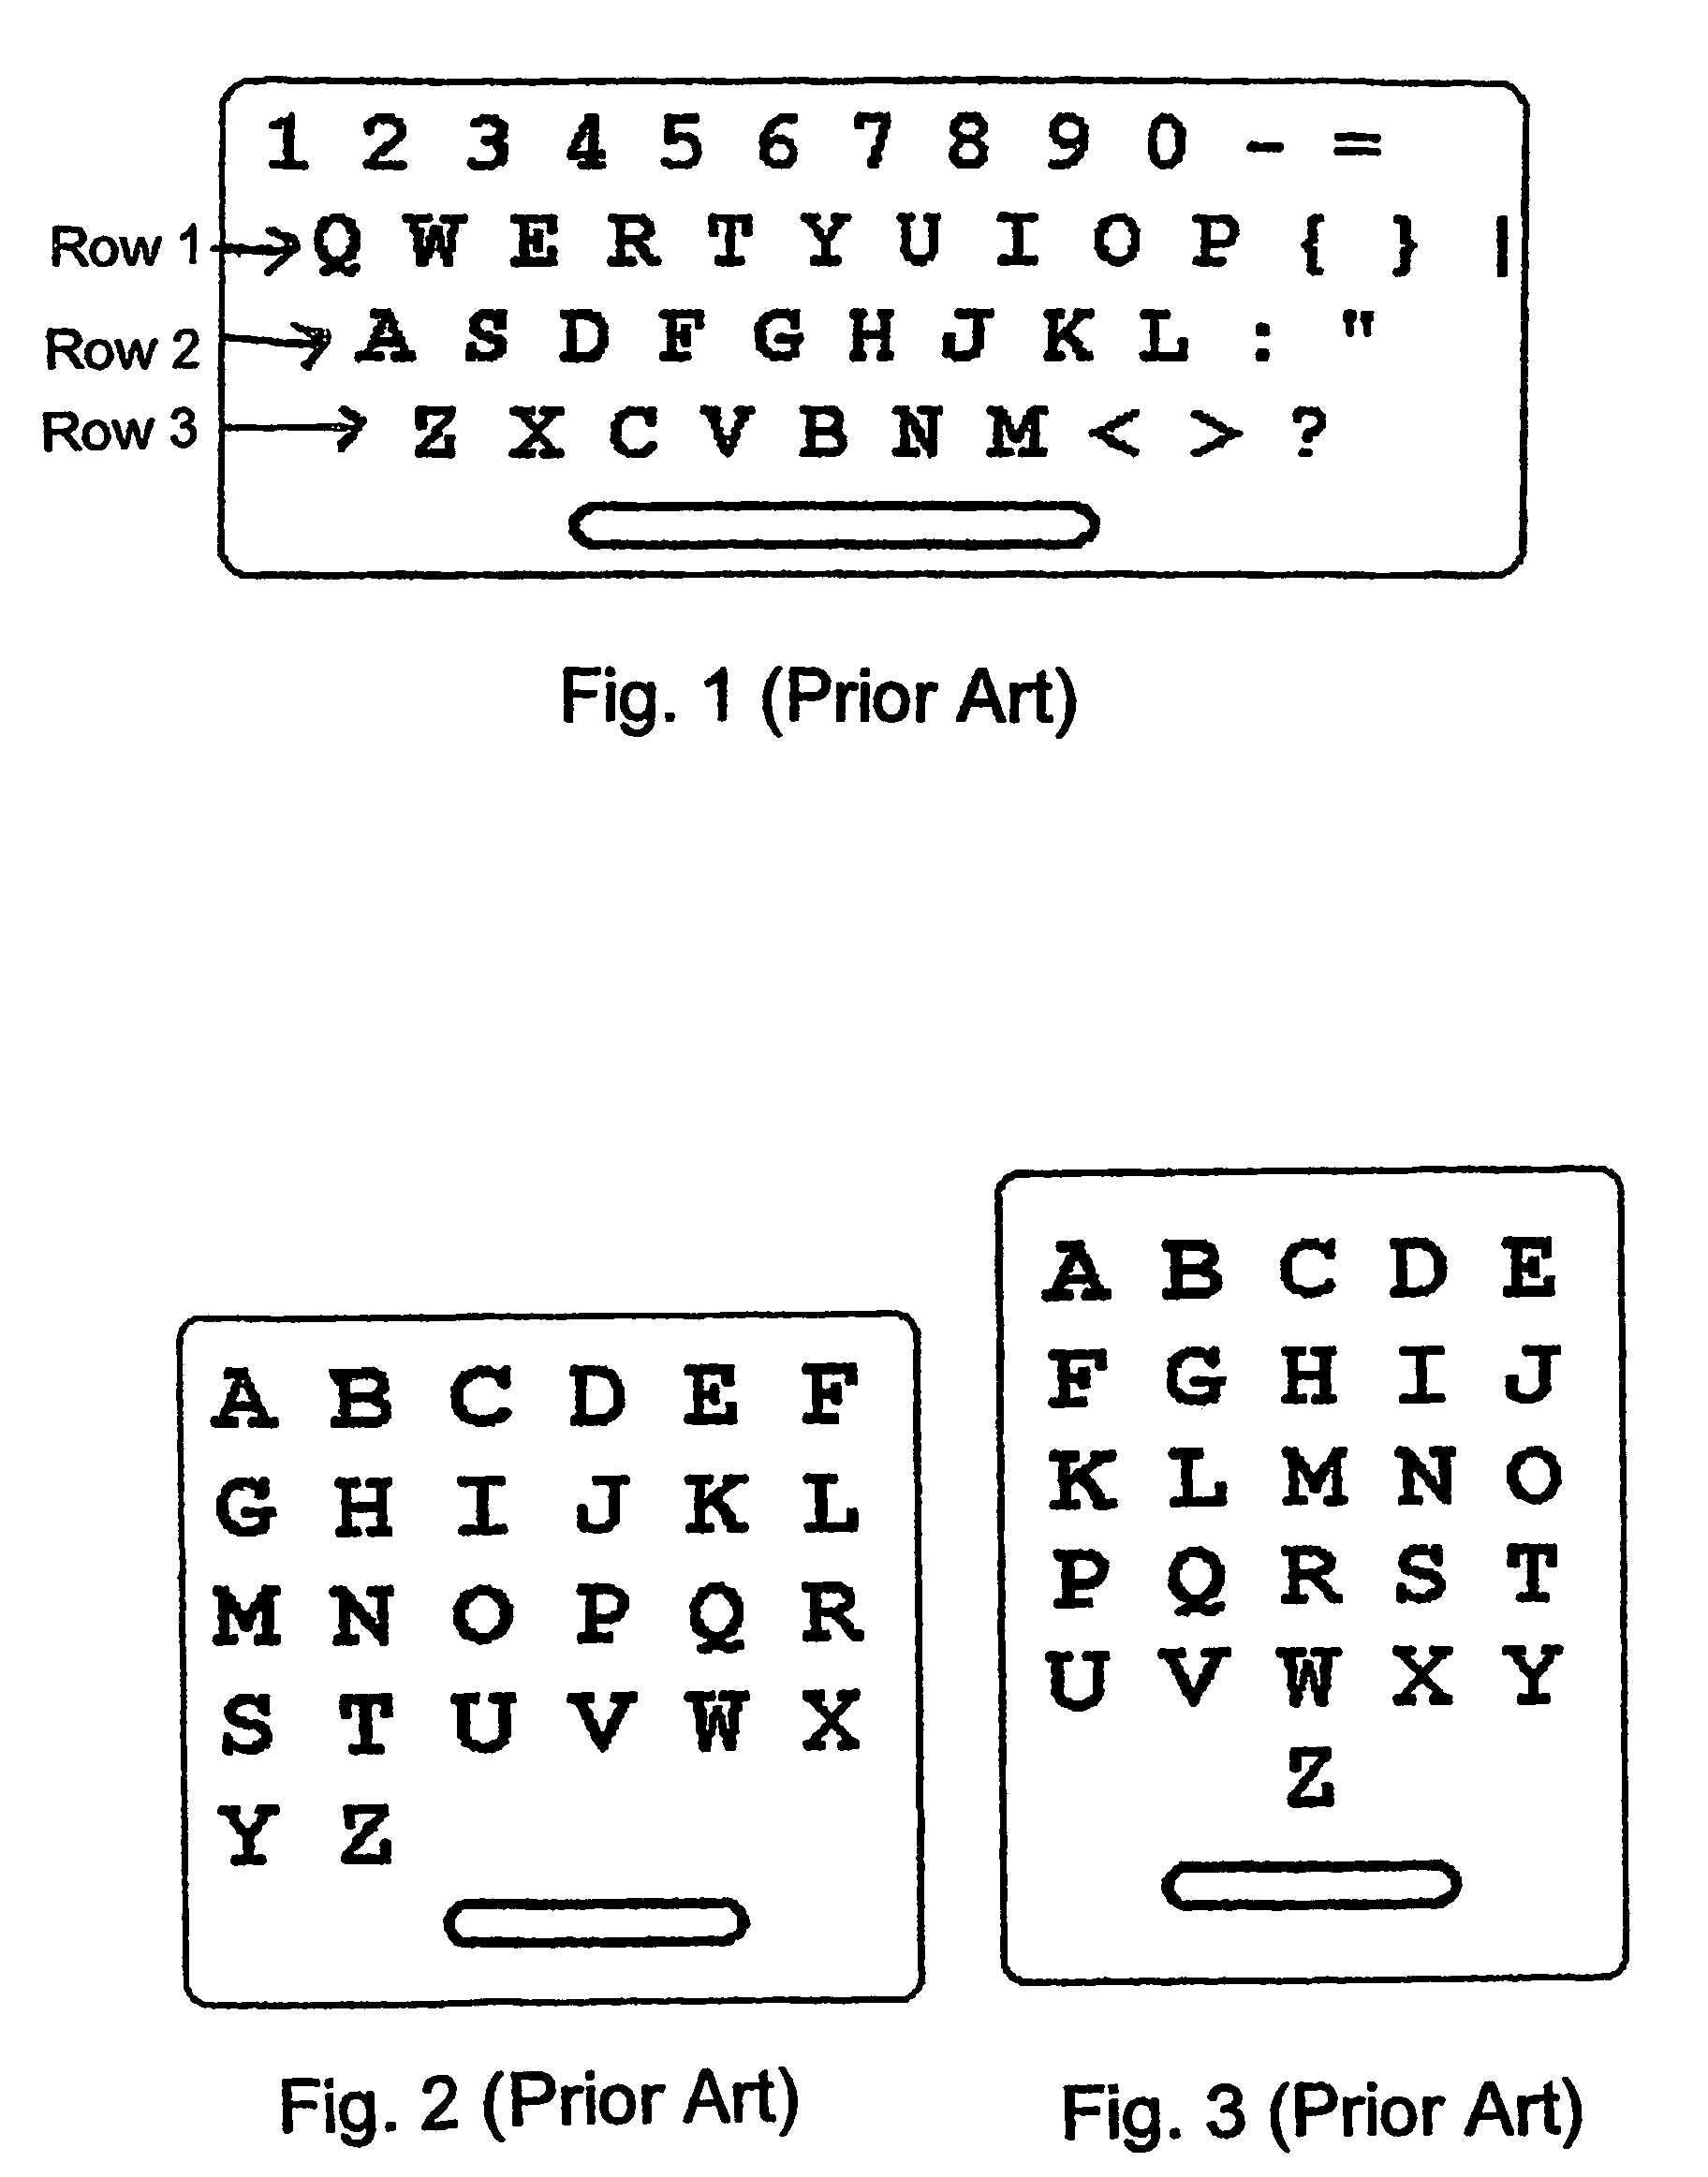 Modified-qwerty letter layout for rapid data entry